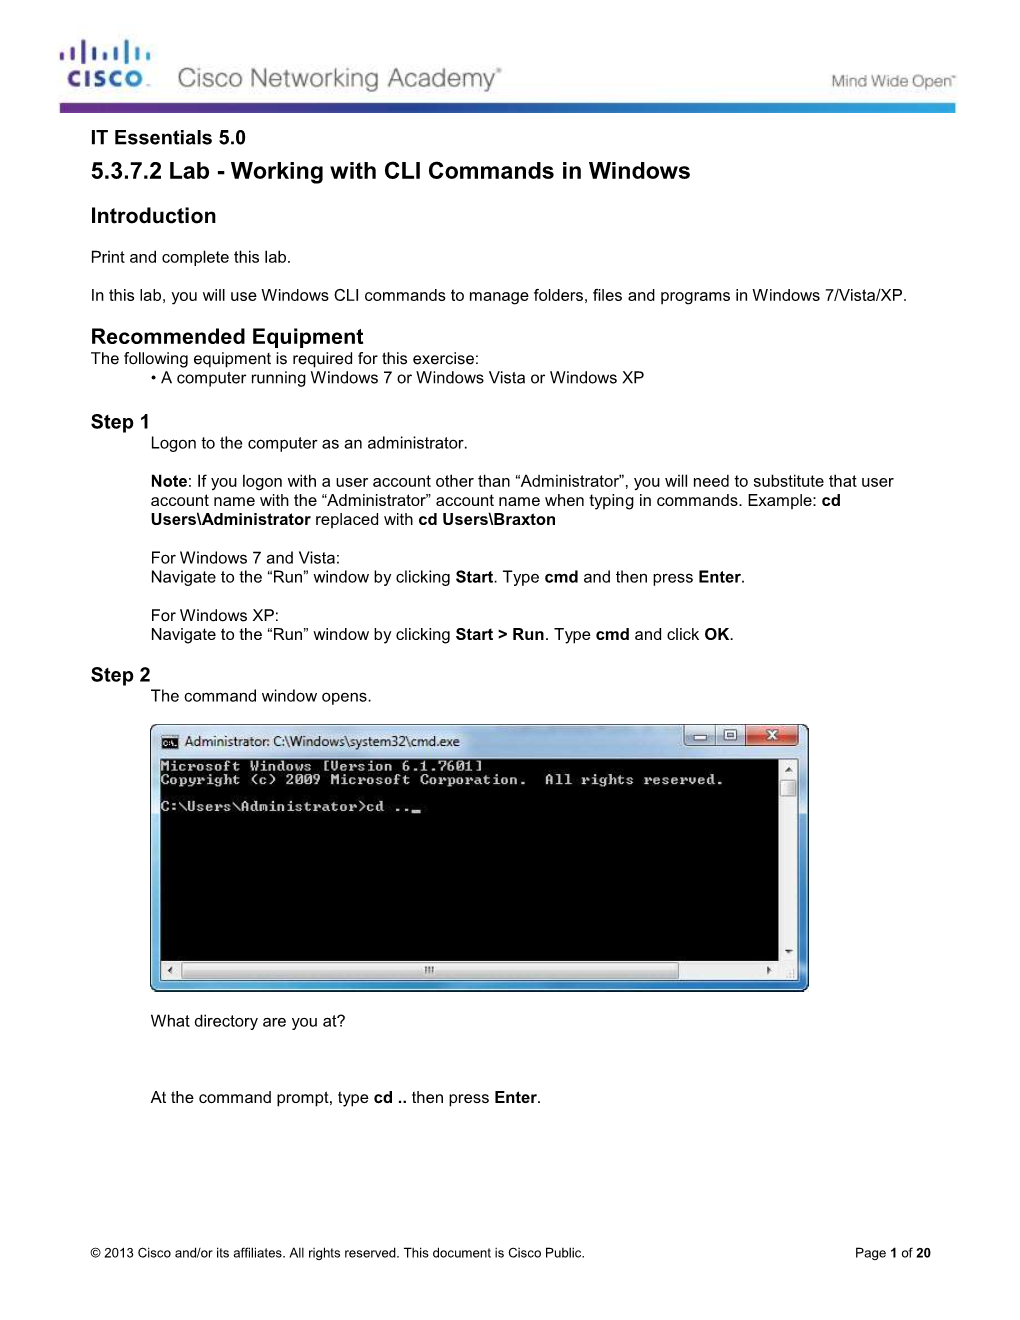 5.3.7.2 Lab - Working with CLI Commands in Windows